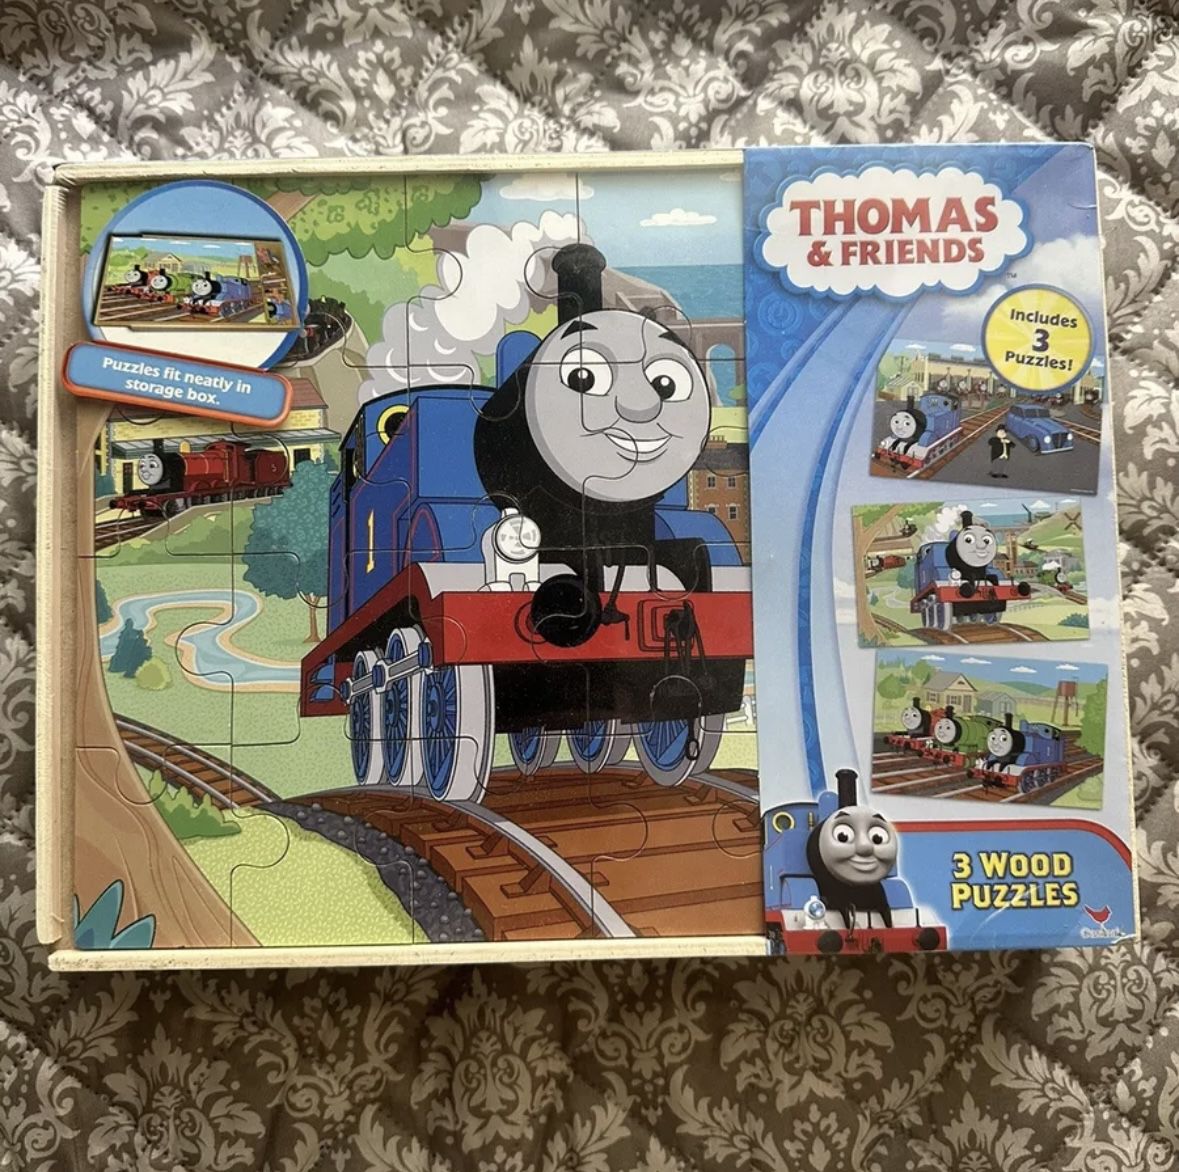 NEW SEALED Thomas The Tank Engine & Friends 3 Wood Puzzles In Storage Box 2011